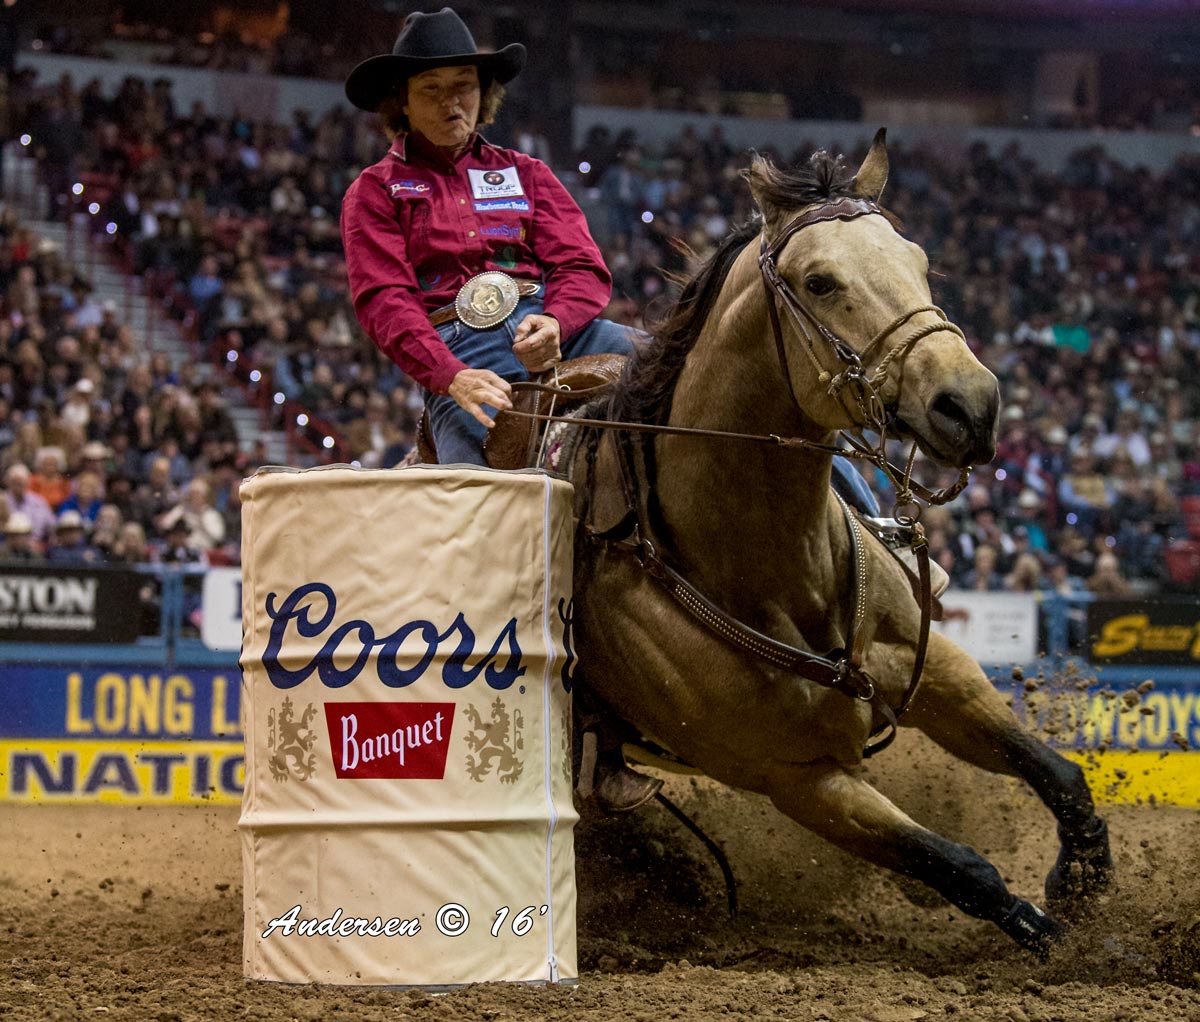 Mary Burger with a time of 13.58 during Round 7 of WNFR16